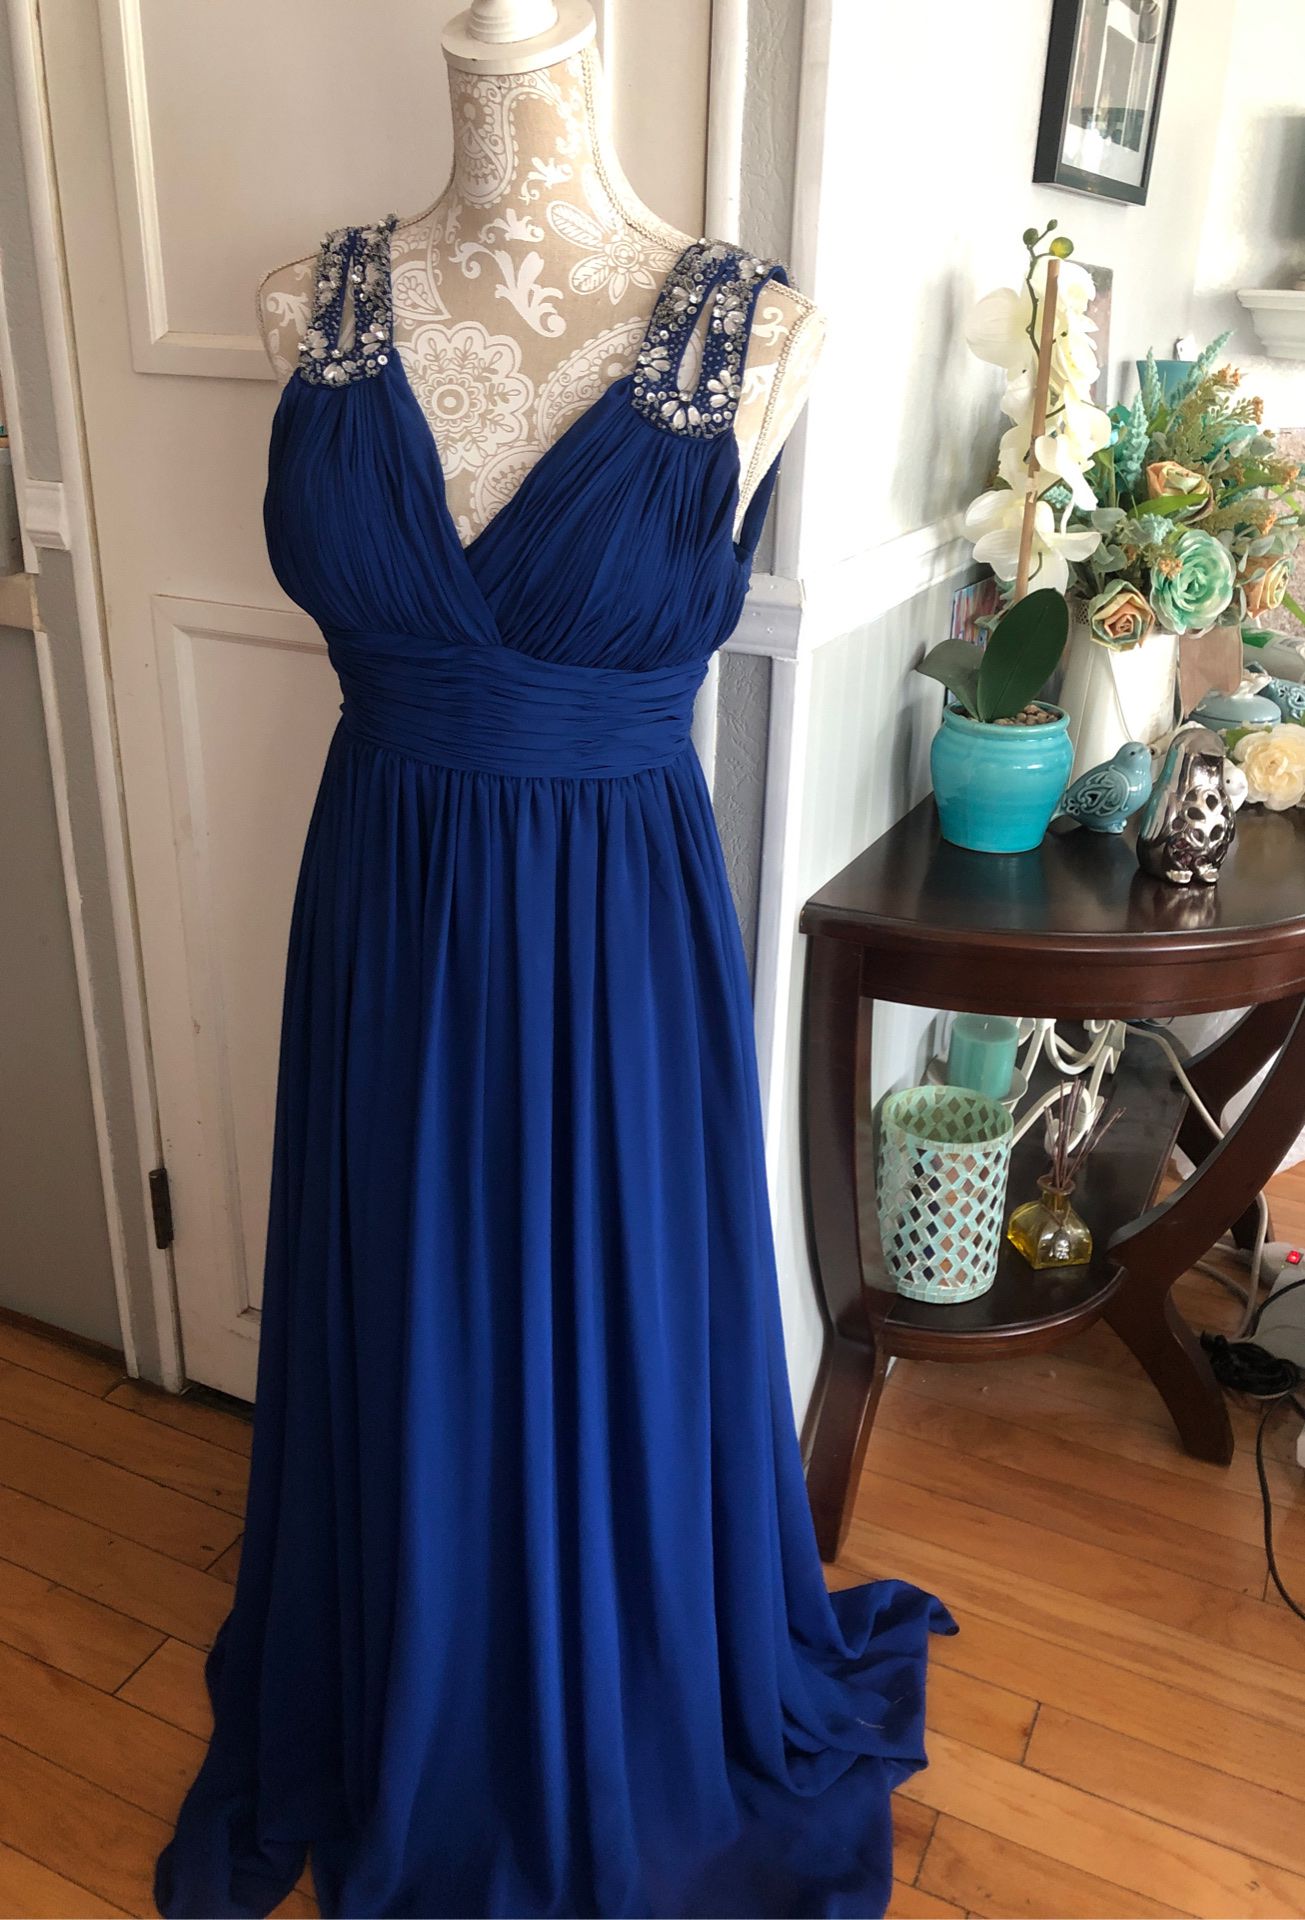 Beautiful Dress in royal blue color